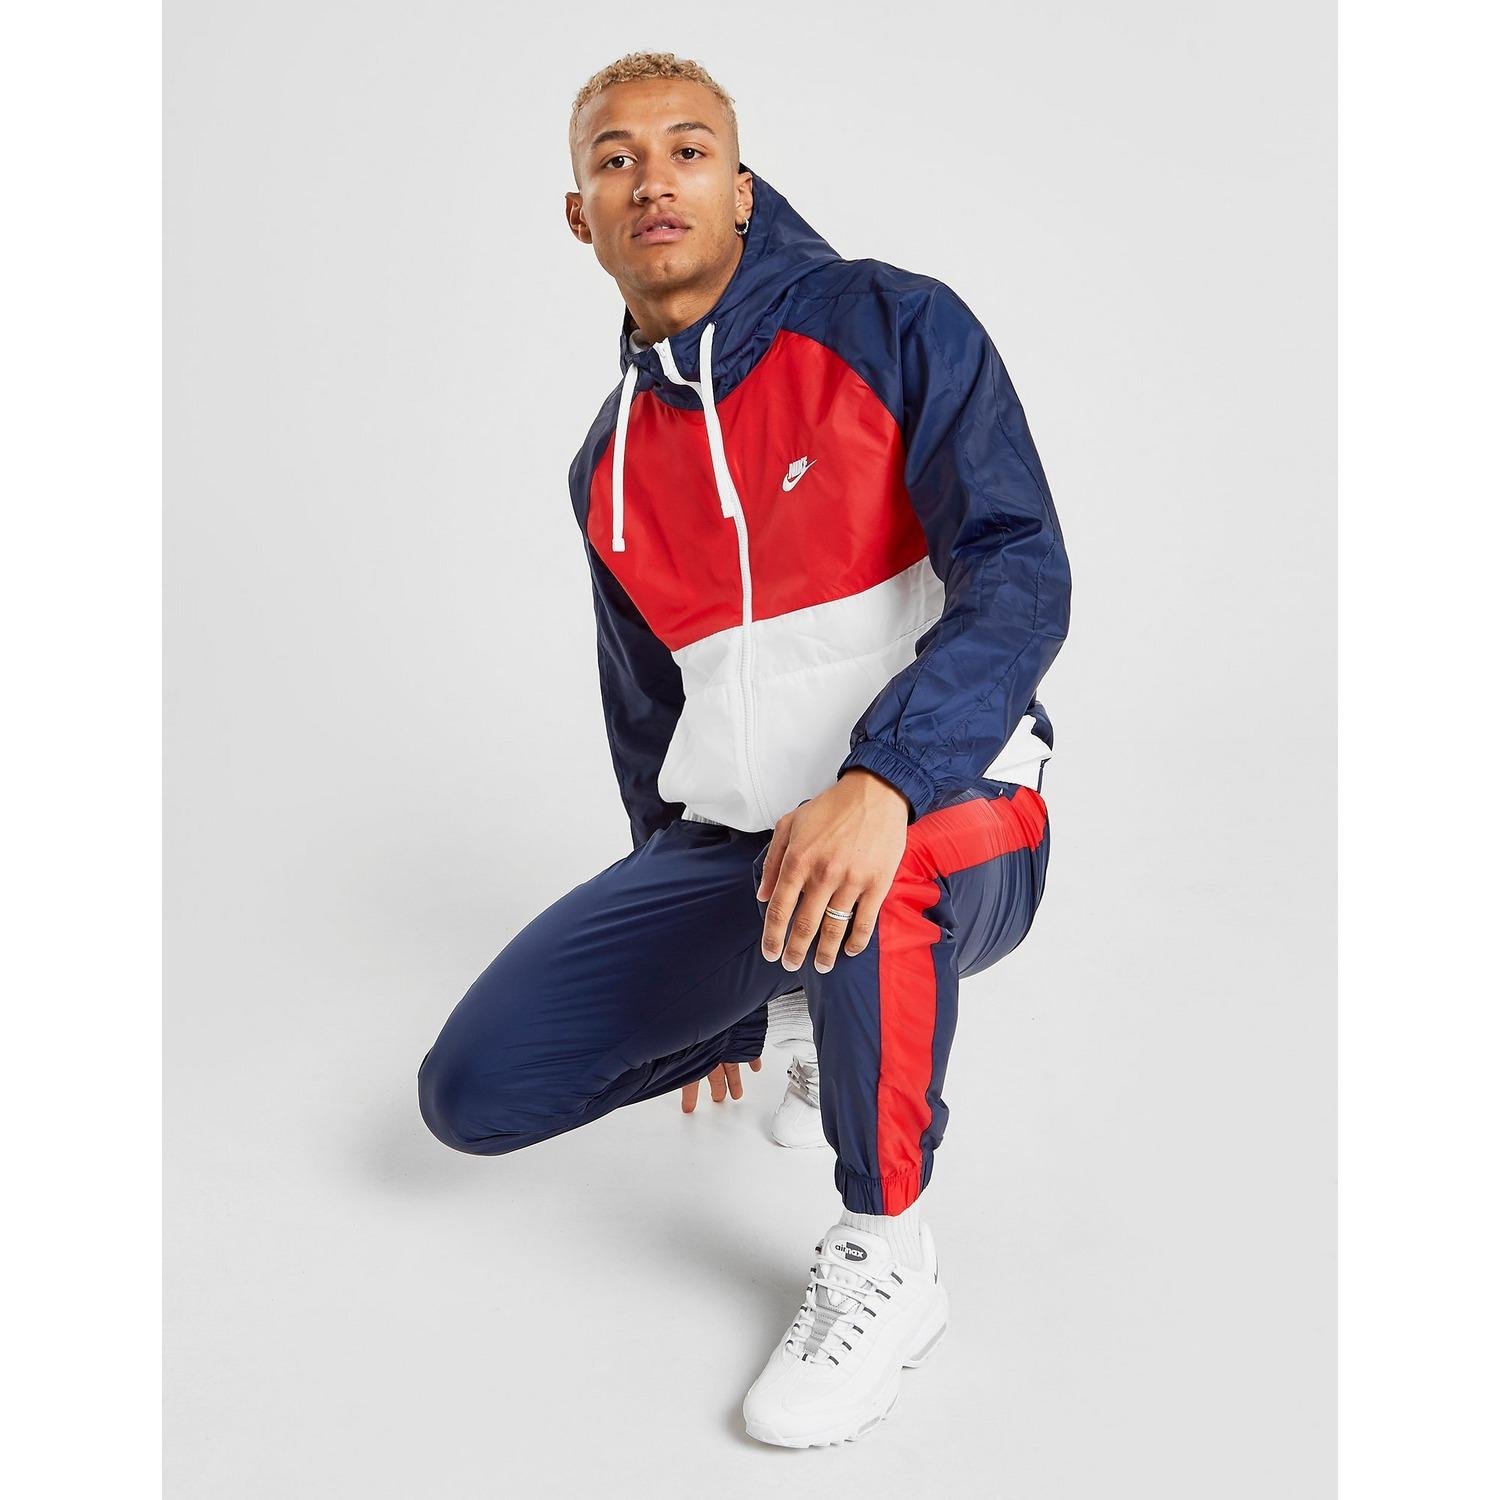 white and red nike tracksuit